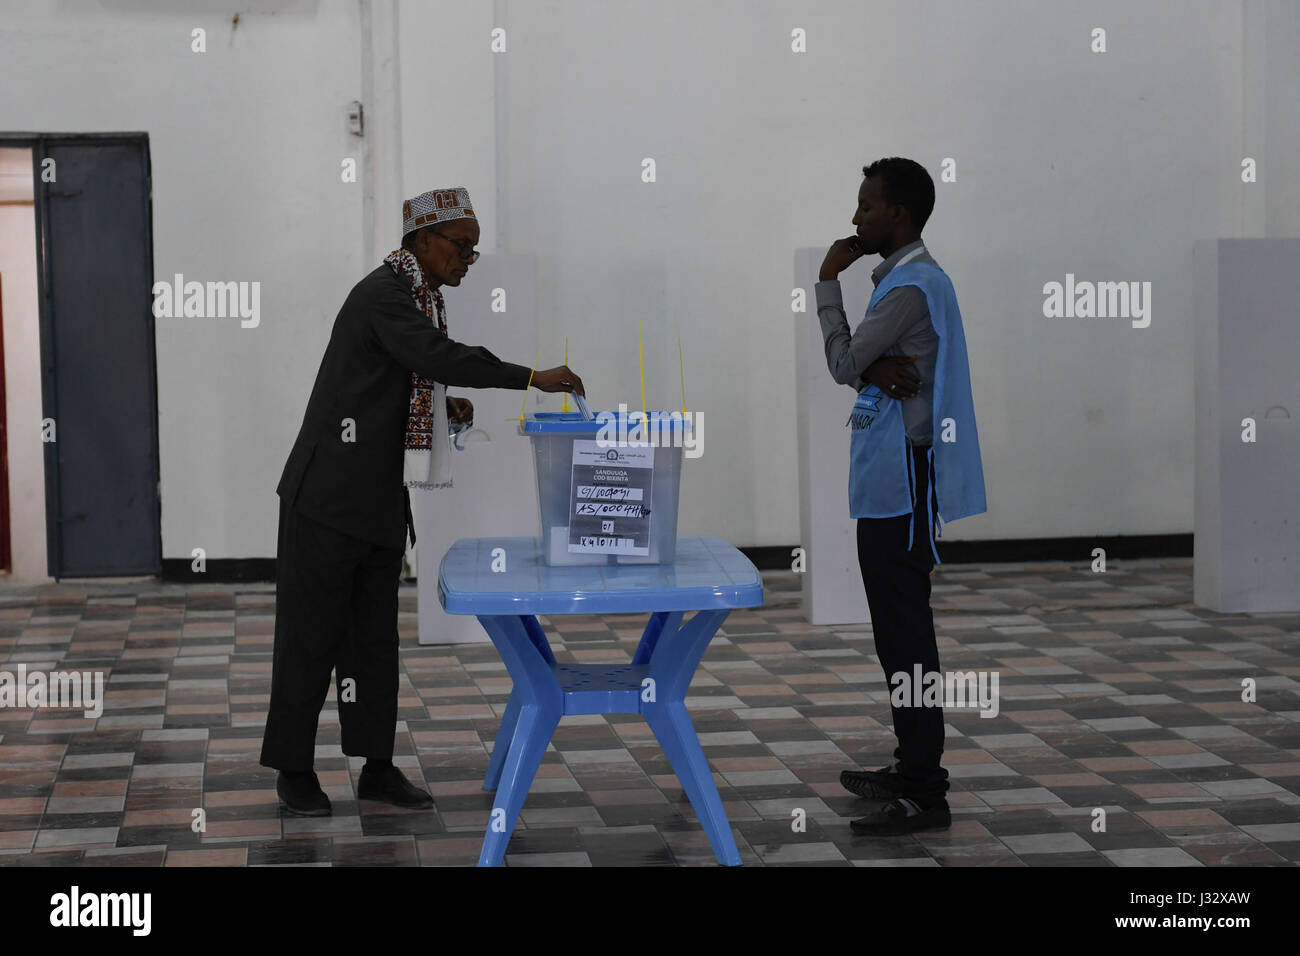 A delegate from Somaliland votes during the electoral process to choose Somaliland's representatives to the Upper House of the Federal Parliament in Mogadishu, Somalia, on January 8, 2017. AMISOM Photo / Omar Abdisalan Stock Photo